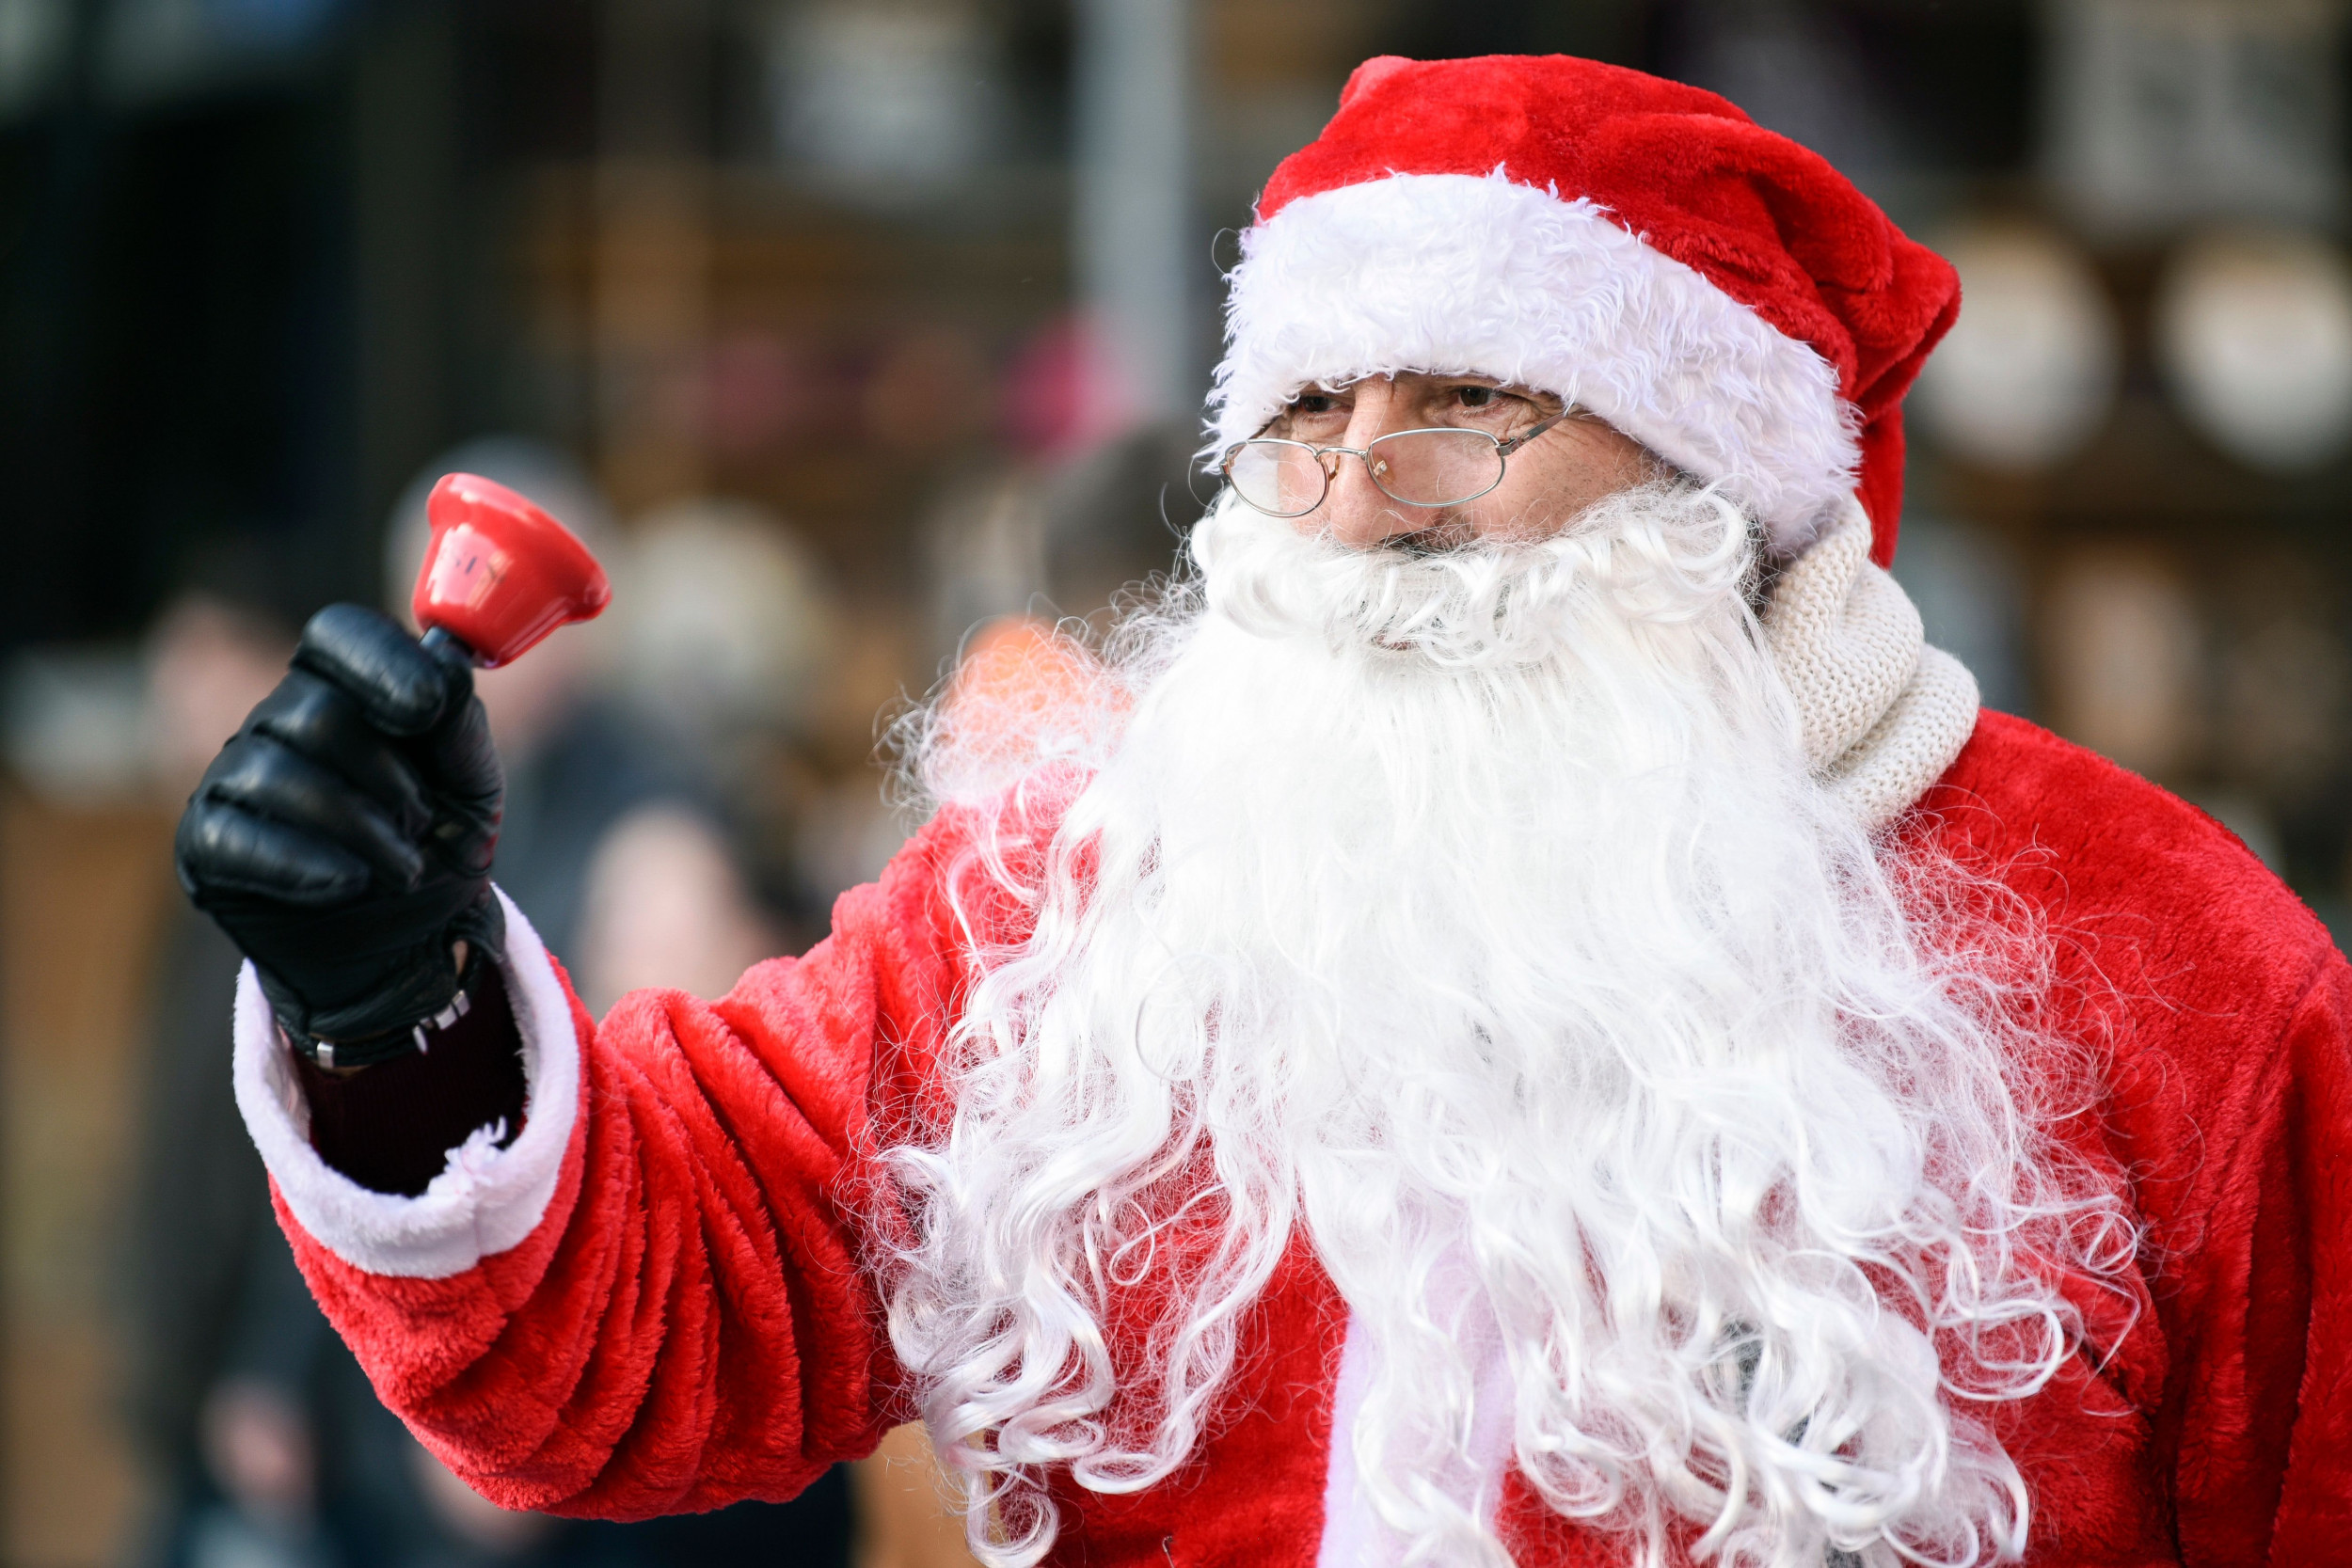 Santa Claus Phone Number 20: How to Call Kris Kringle on